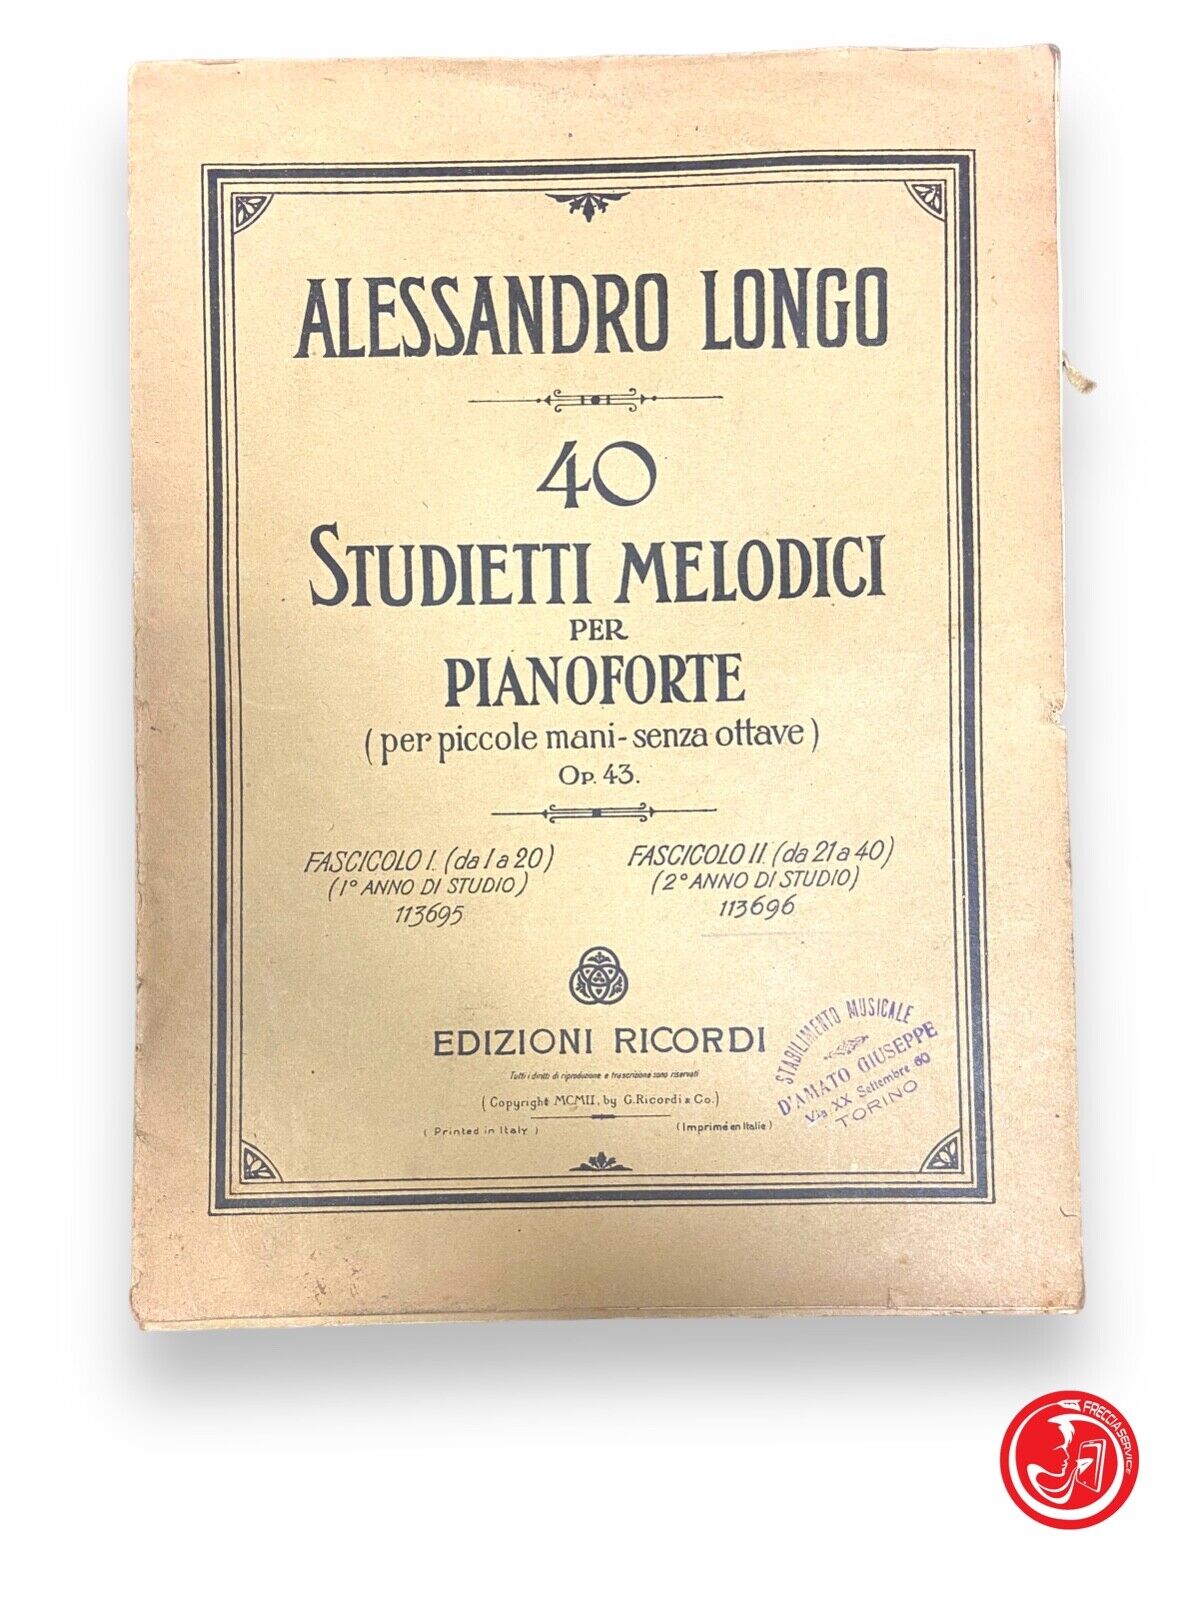 40 melodic studies for piano - A. Longo